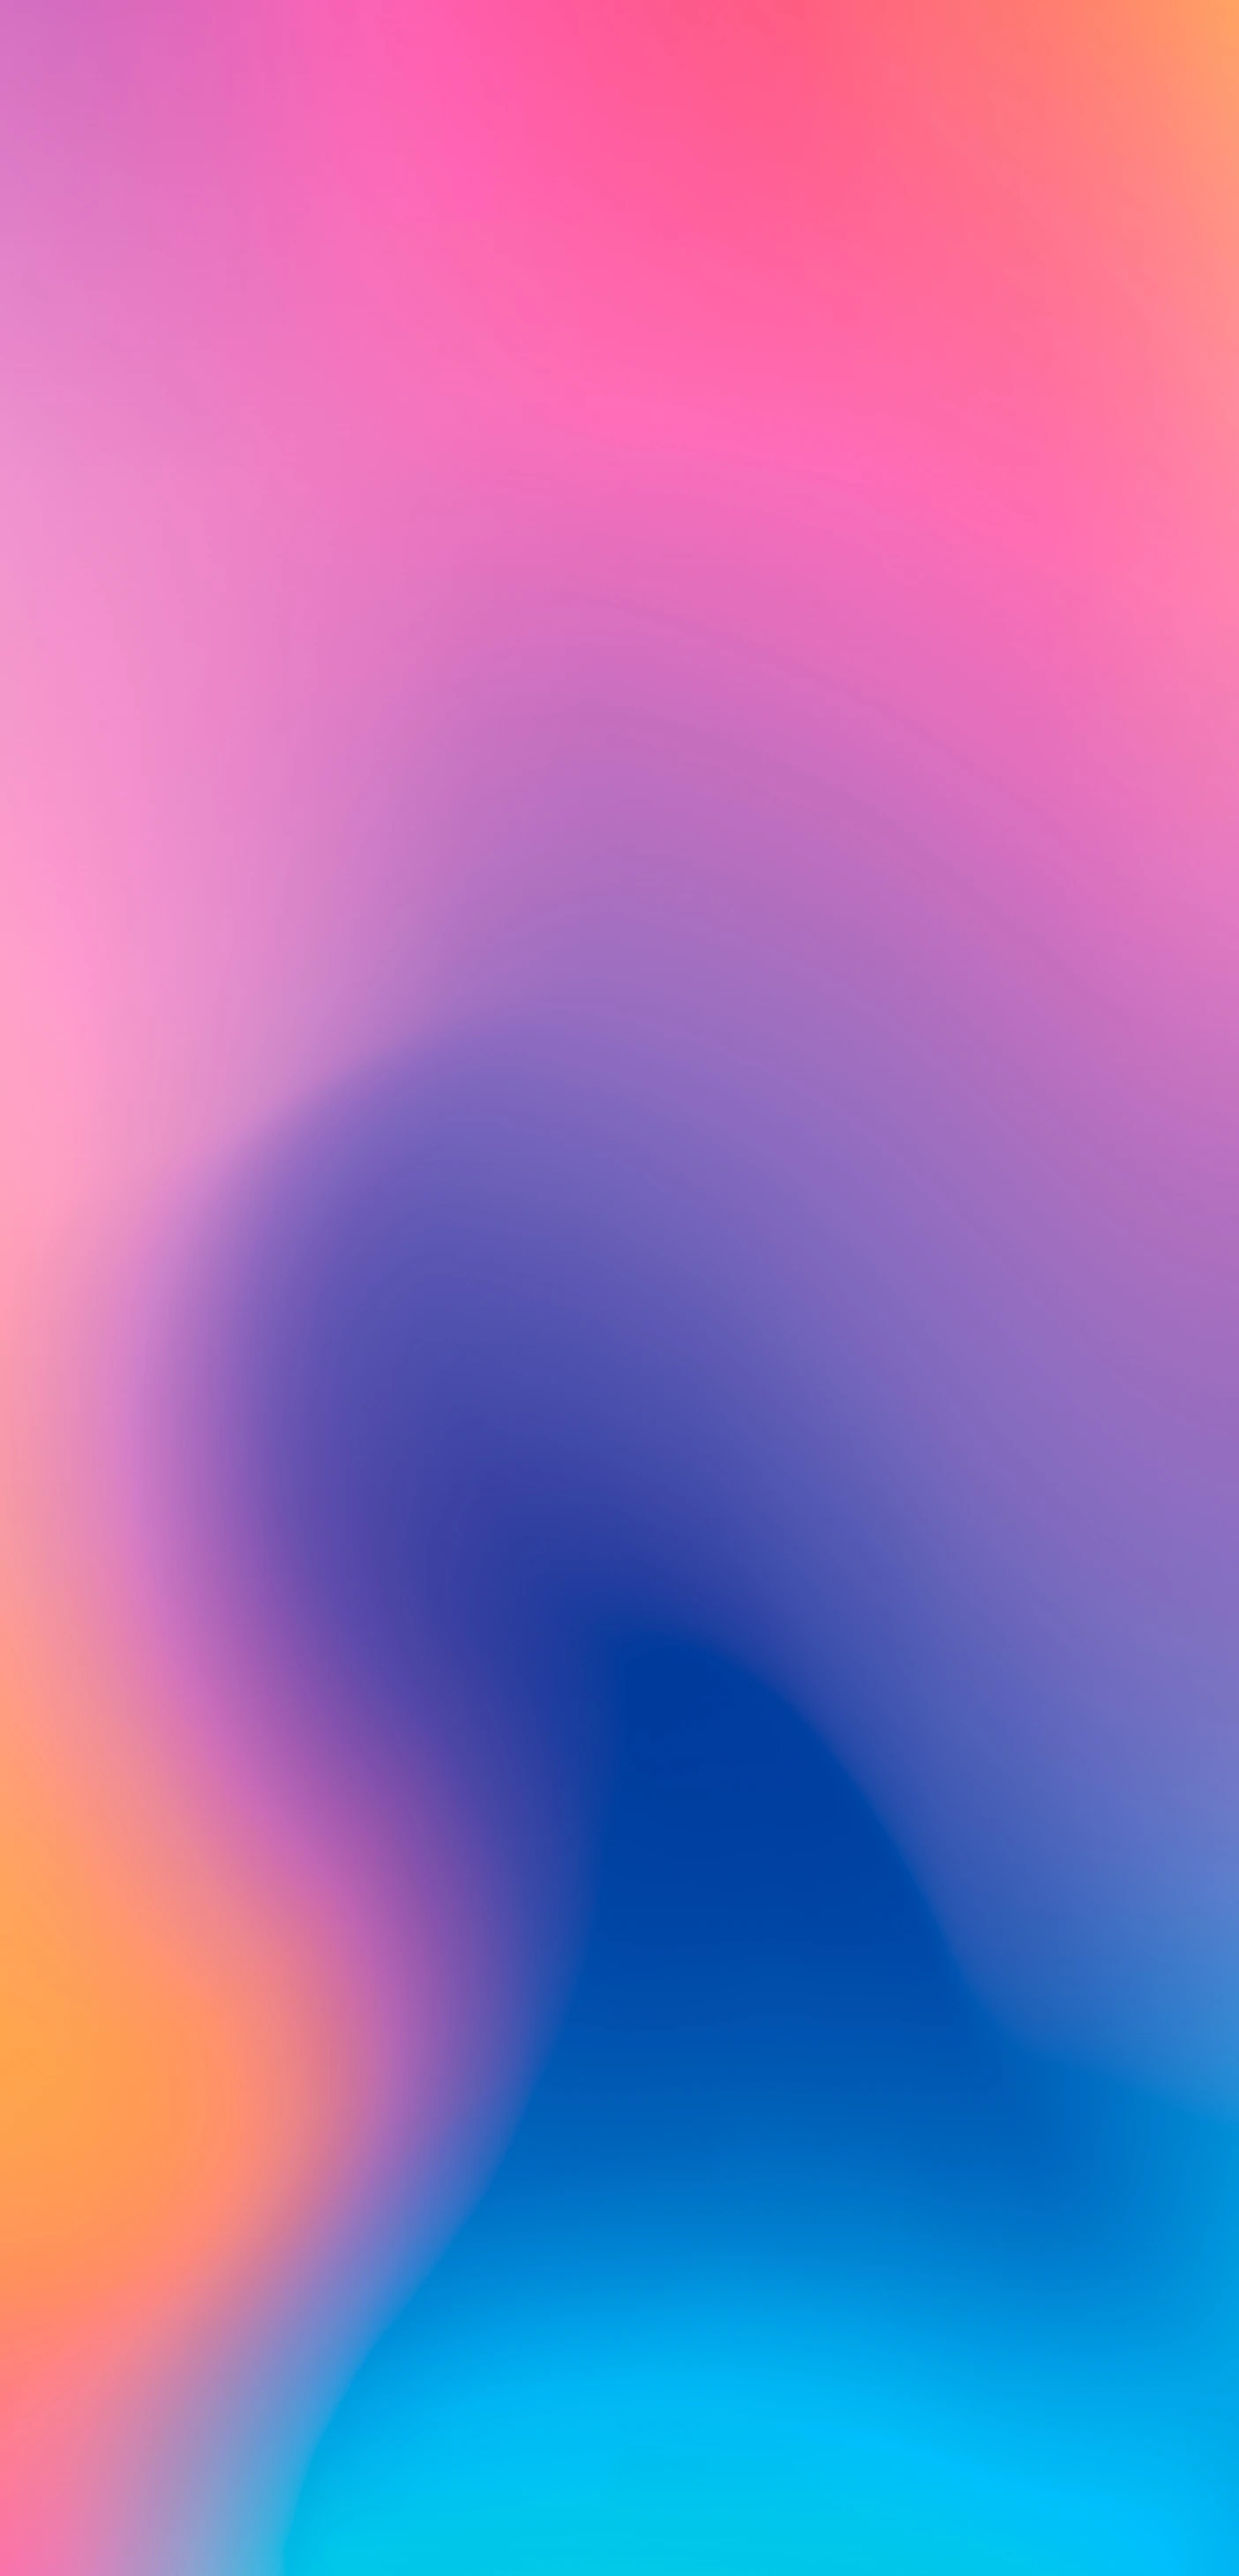 Gradient iPhone wallpaper for free HD - 031